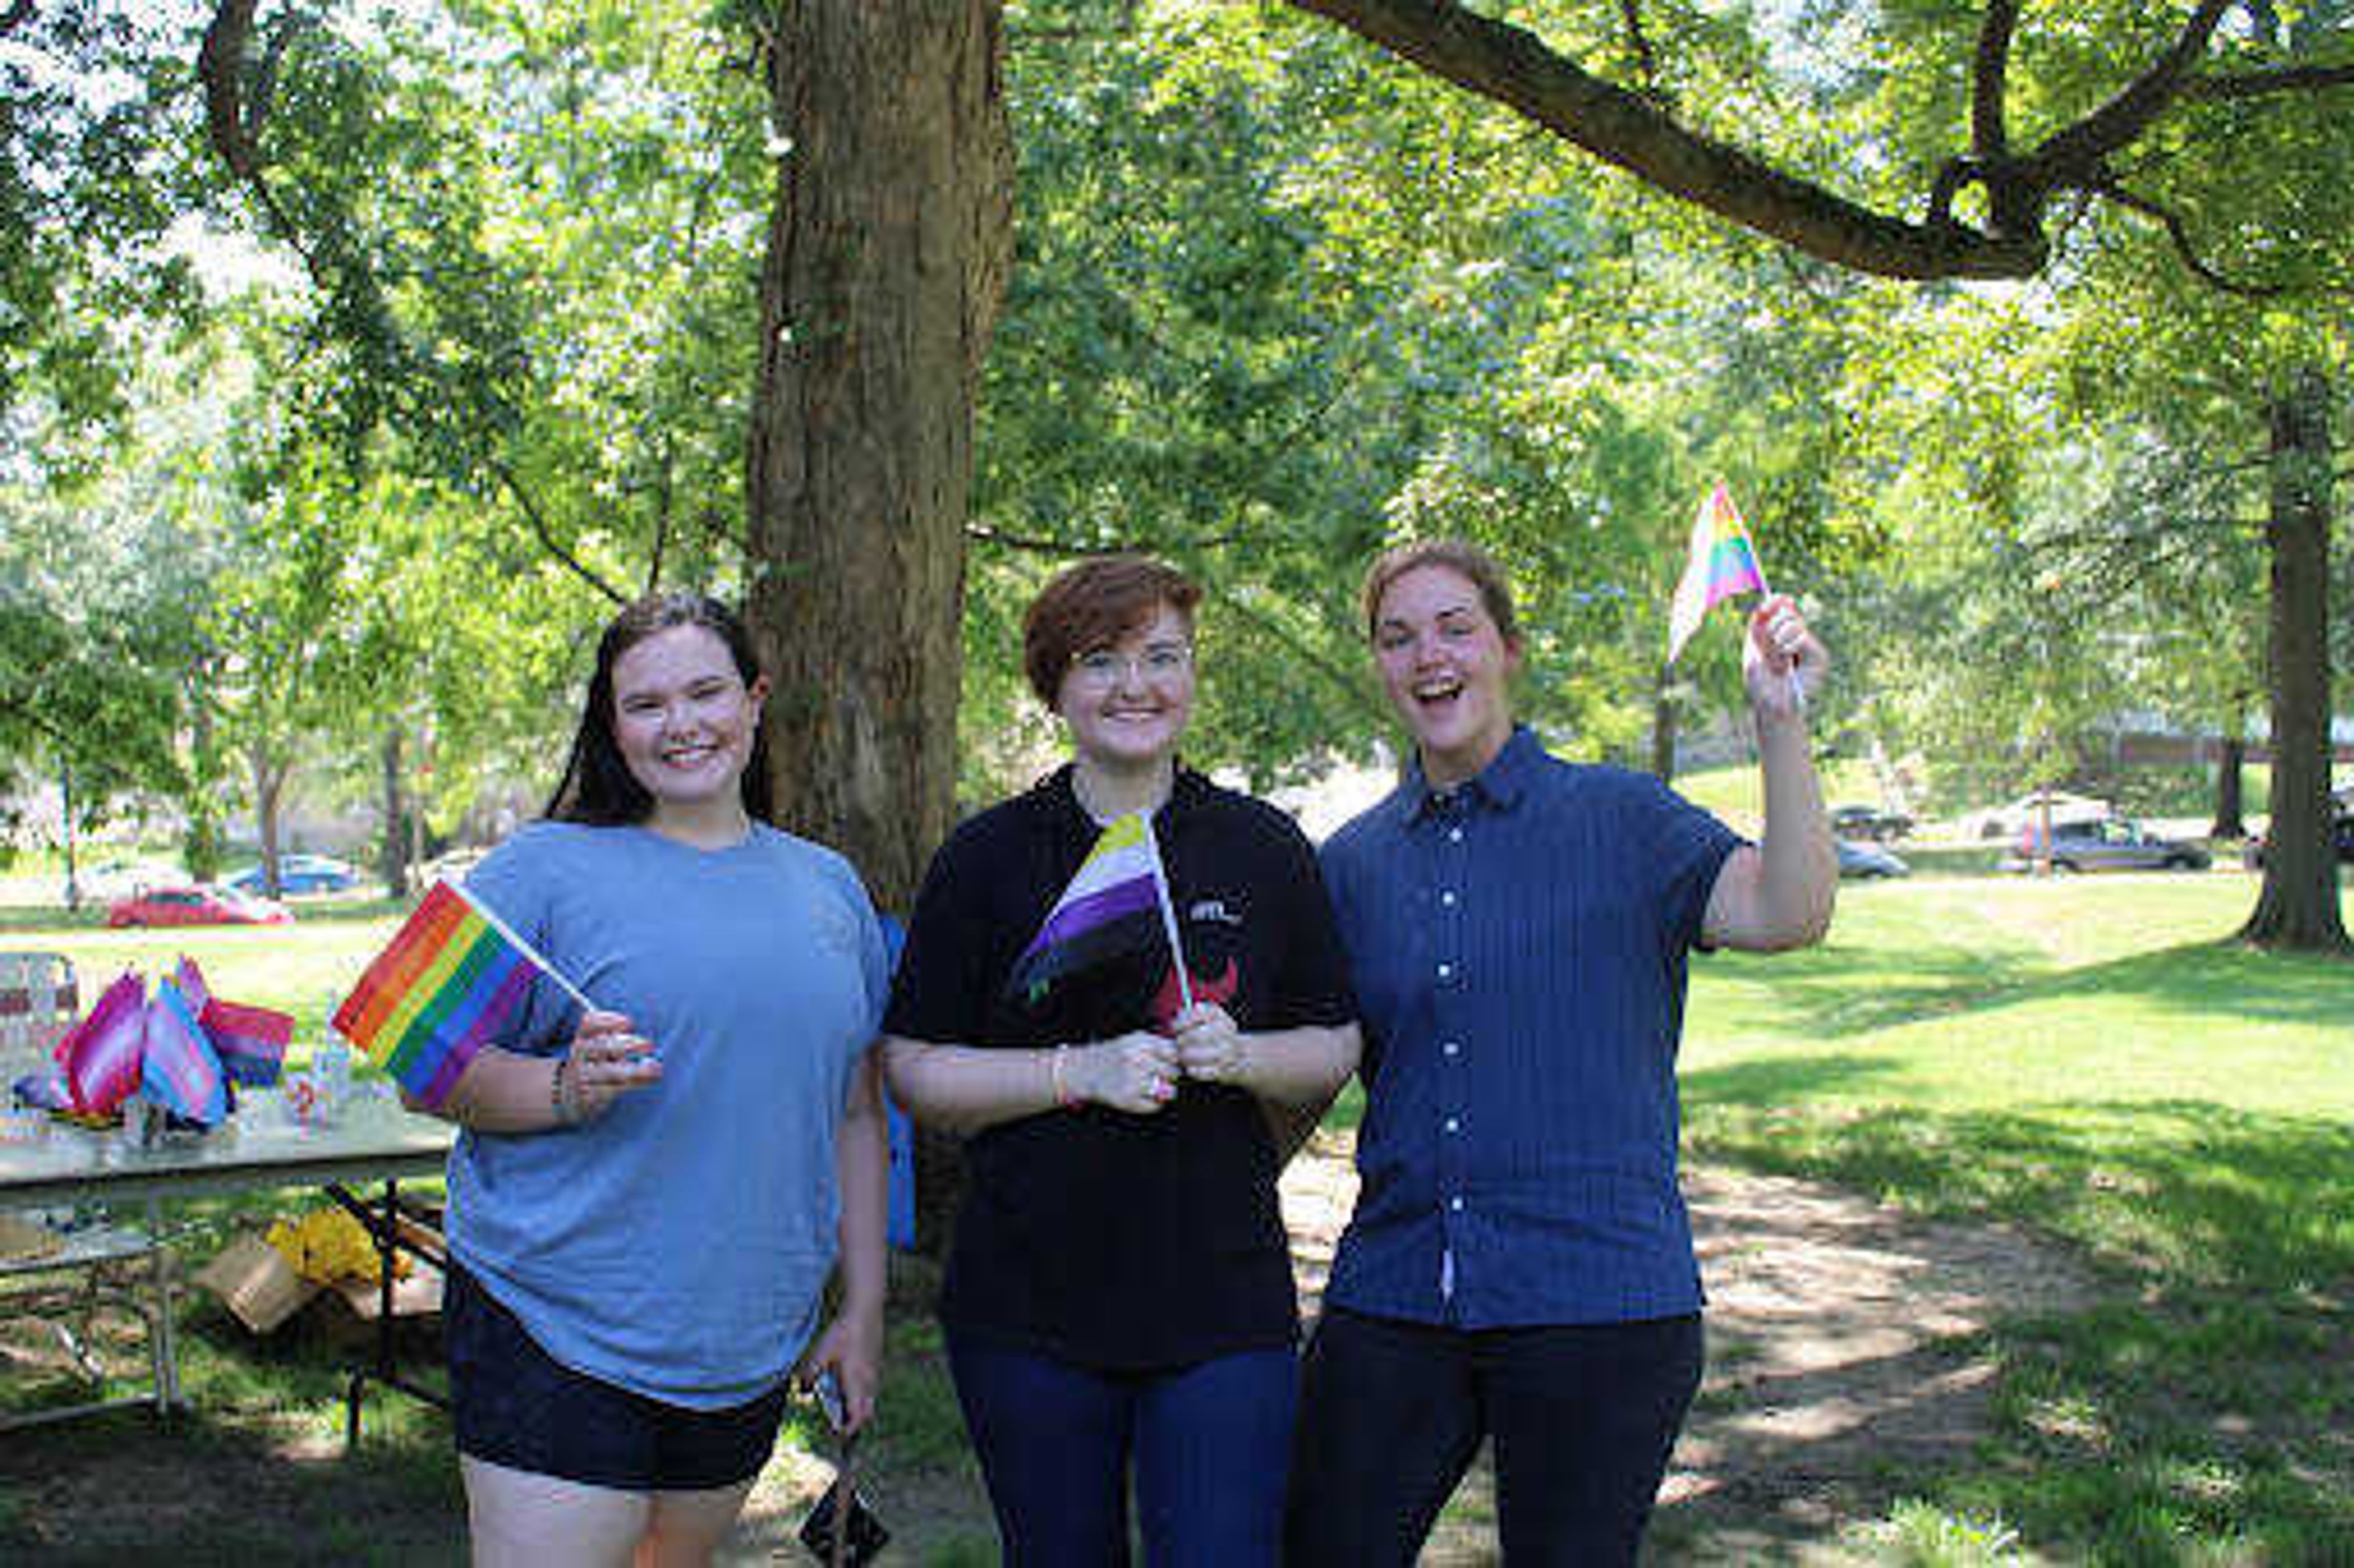 Southeast students wave flags while posing for a photo at the LGBTQ+ and ally picnic on Aug. 25 at the Academic Terraces. Pride flags representing many different identities within the LGBTQ+ community were available at the picnic.